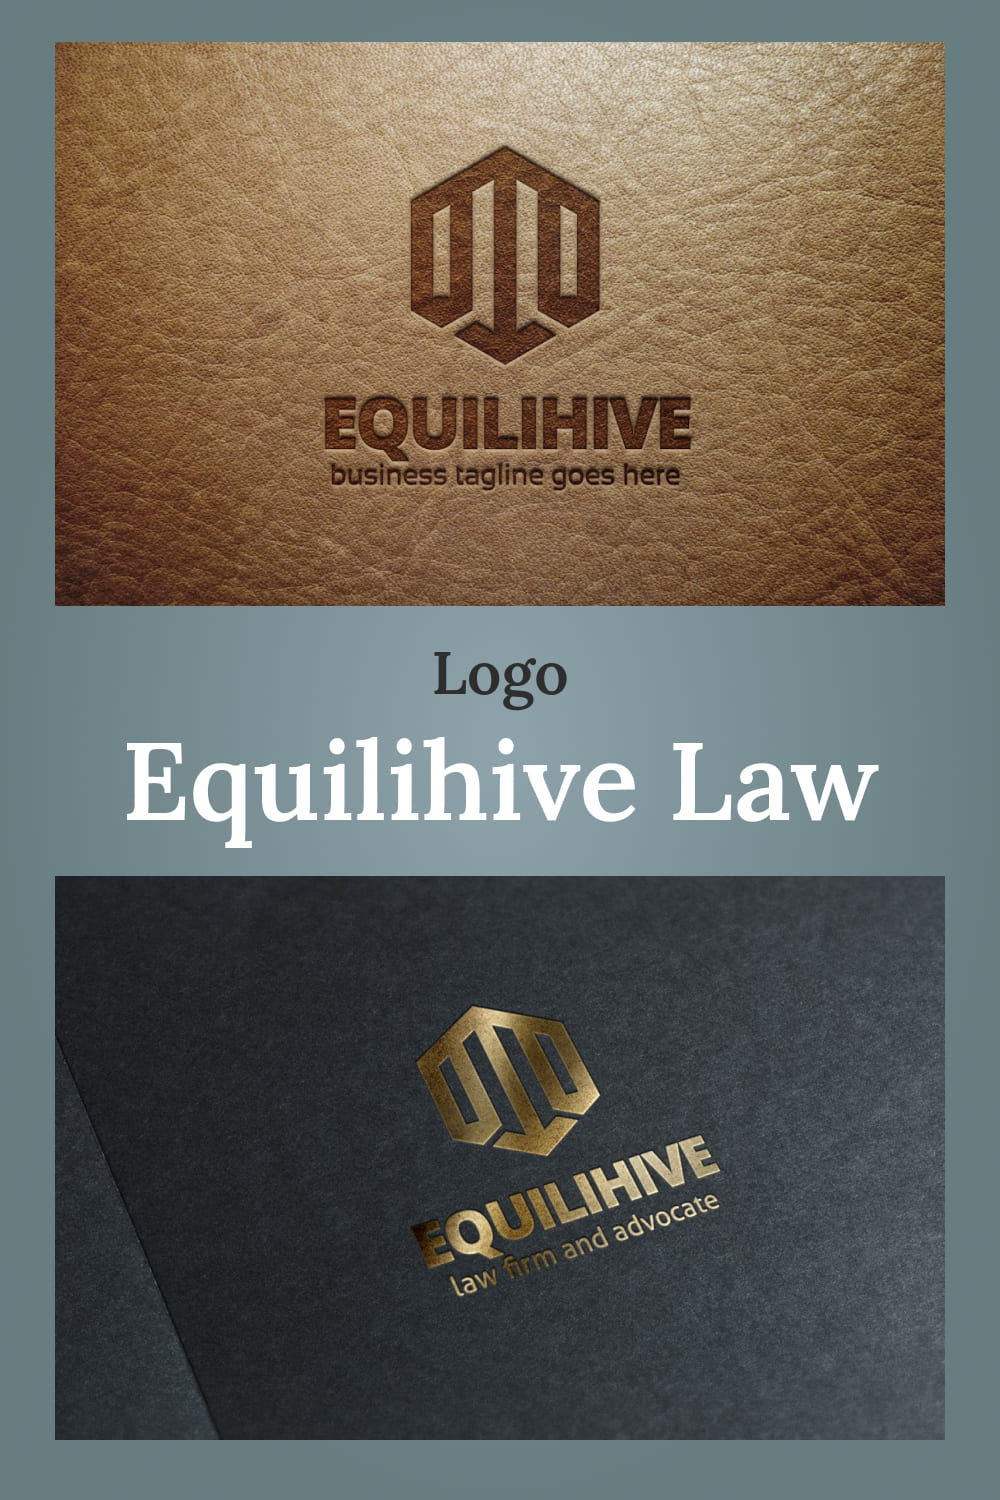 equilihive law logo design template.